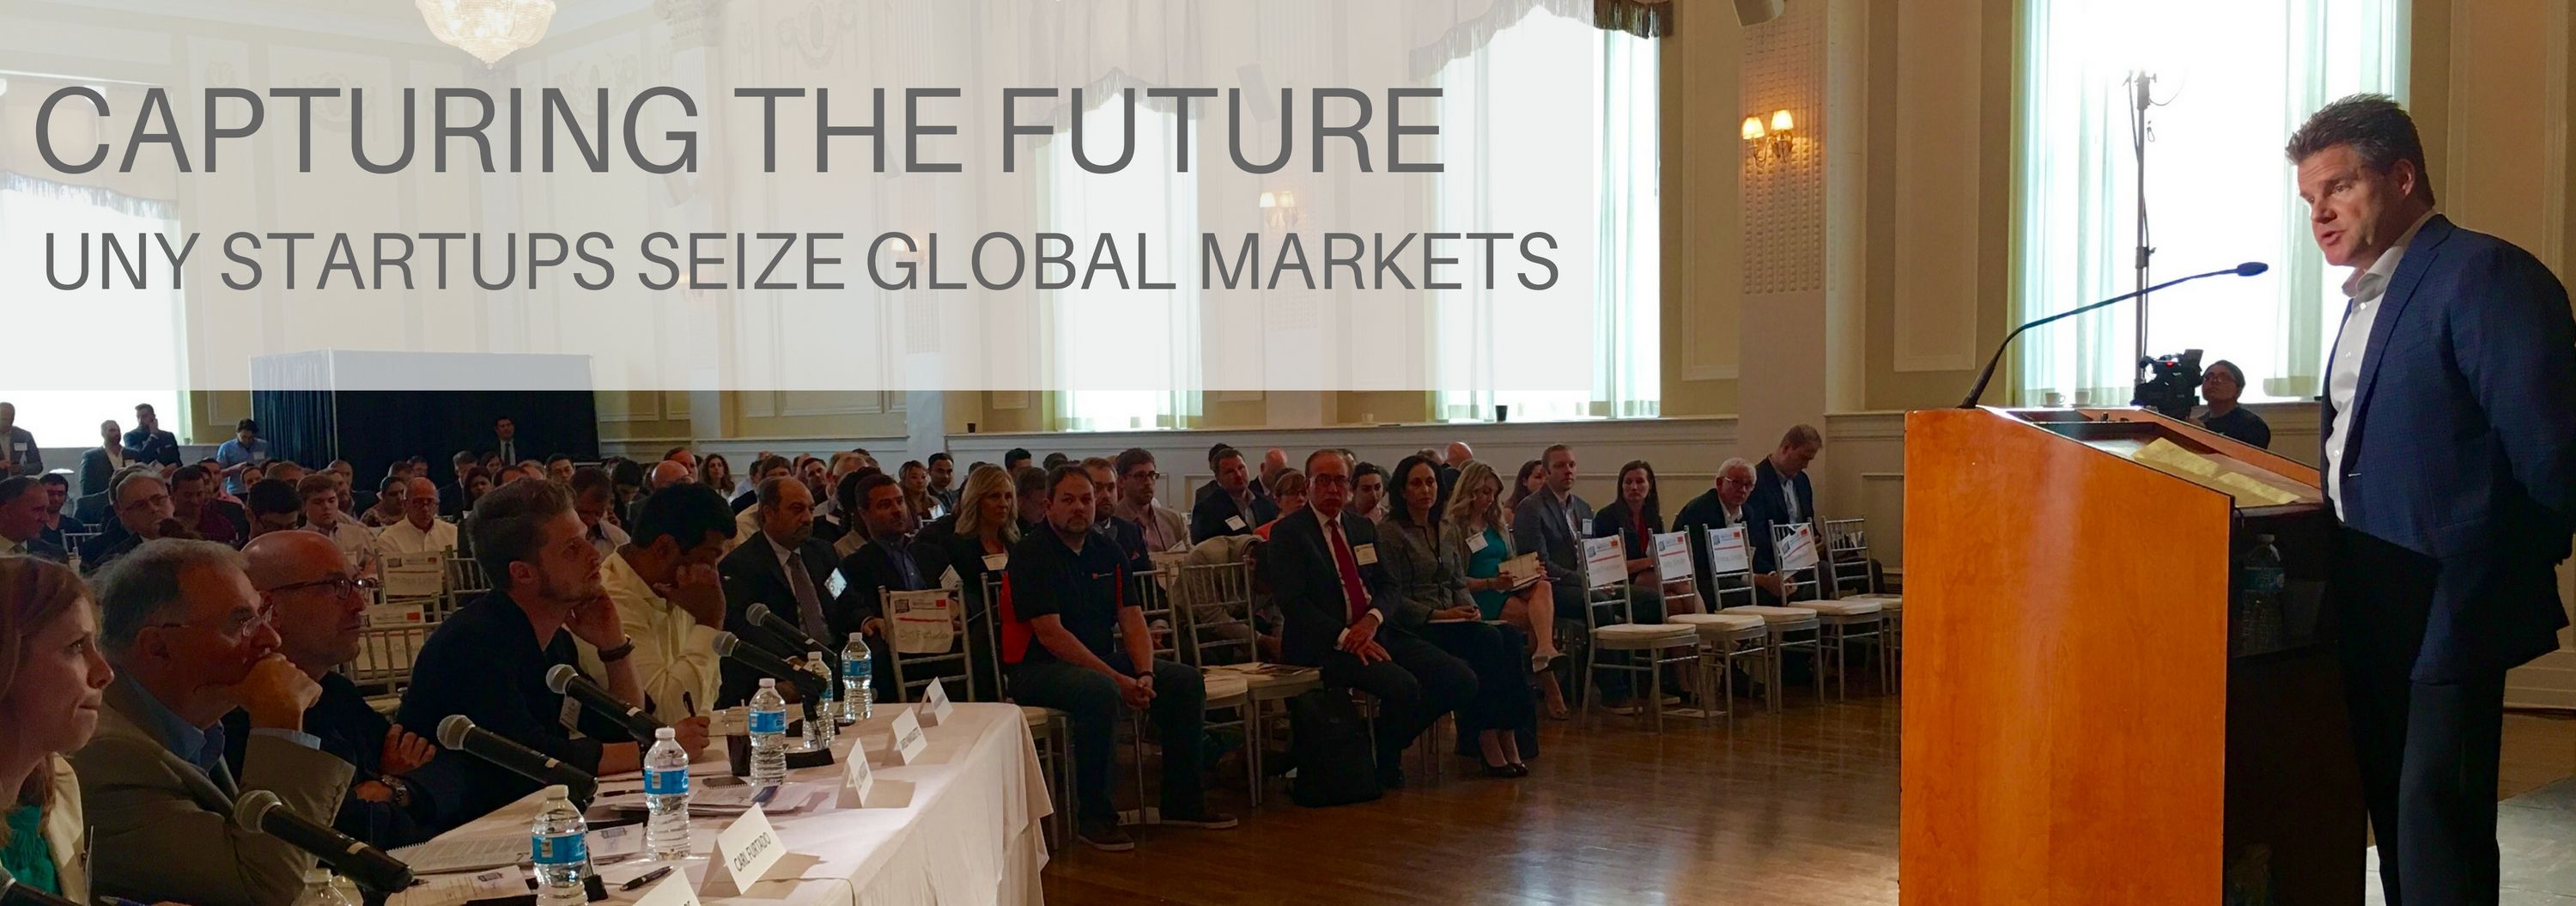 Capturing the Future: UNY Startups Seize Global Markets